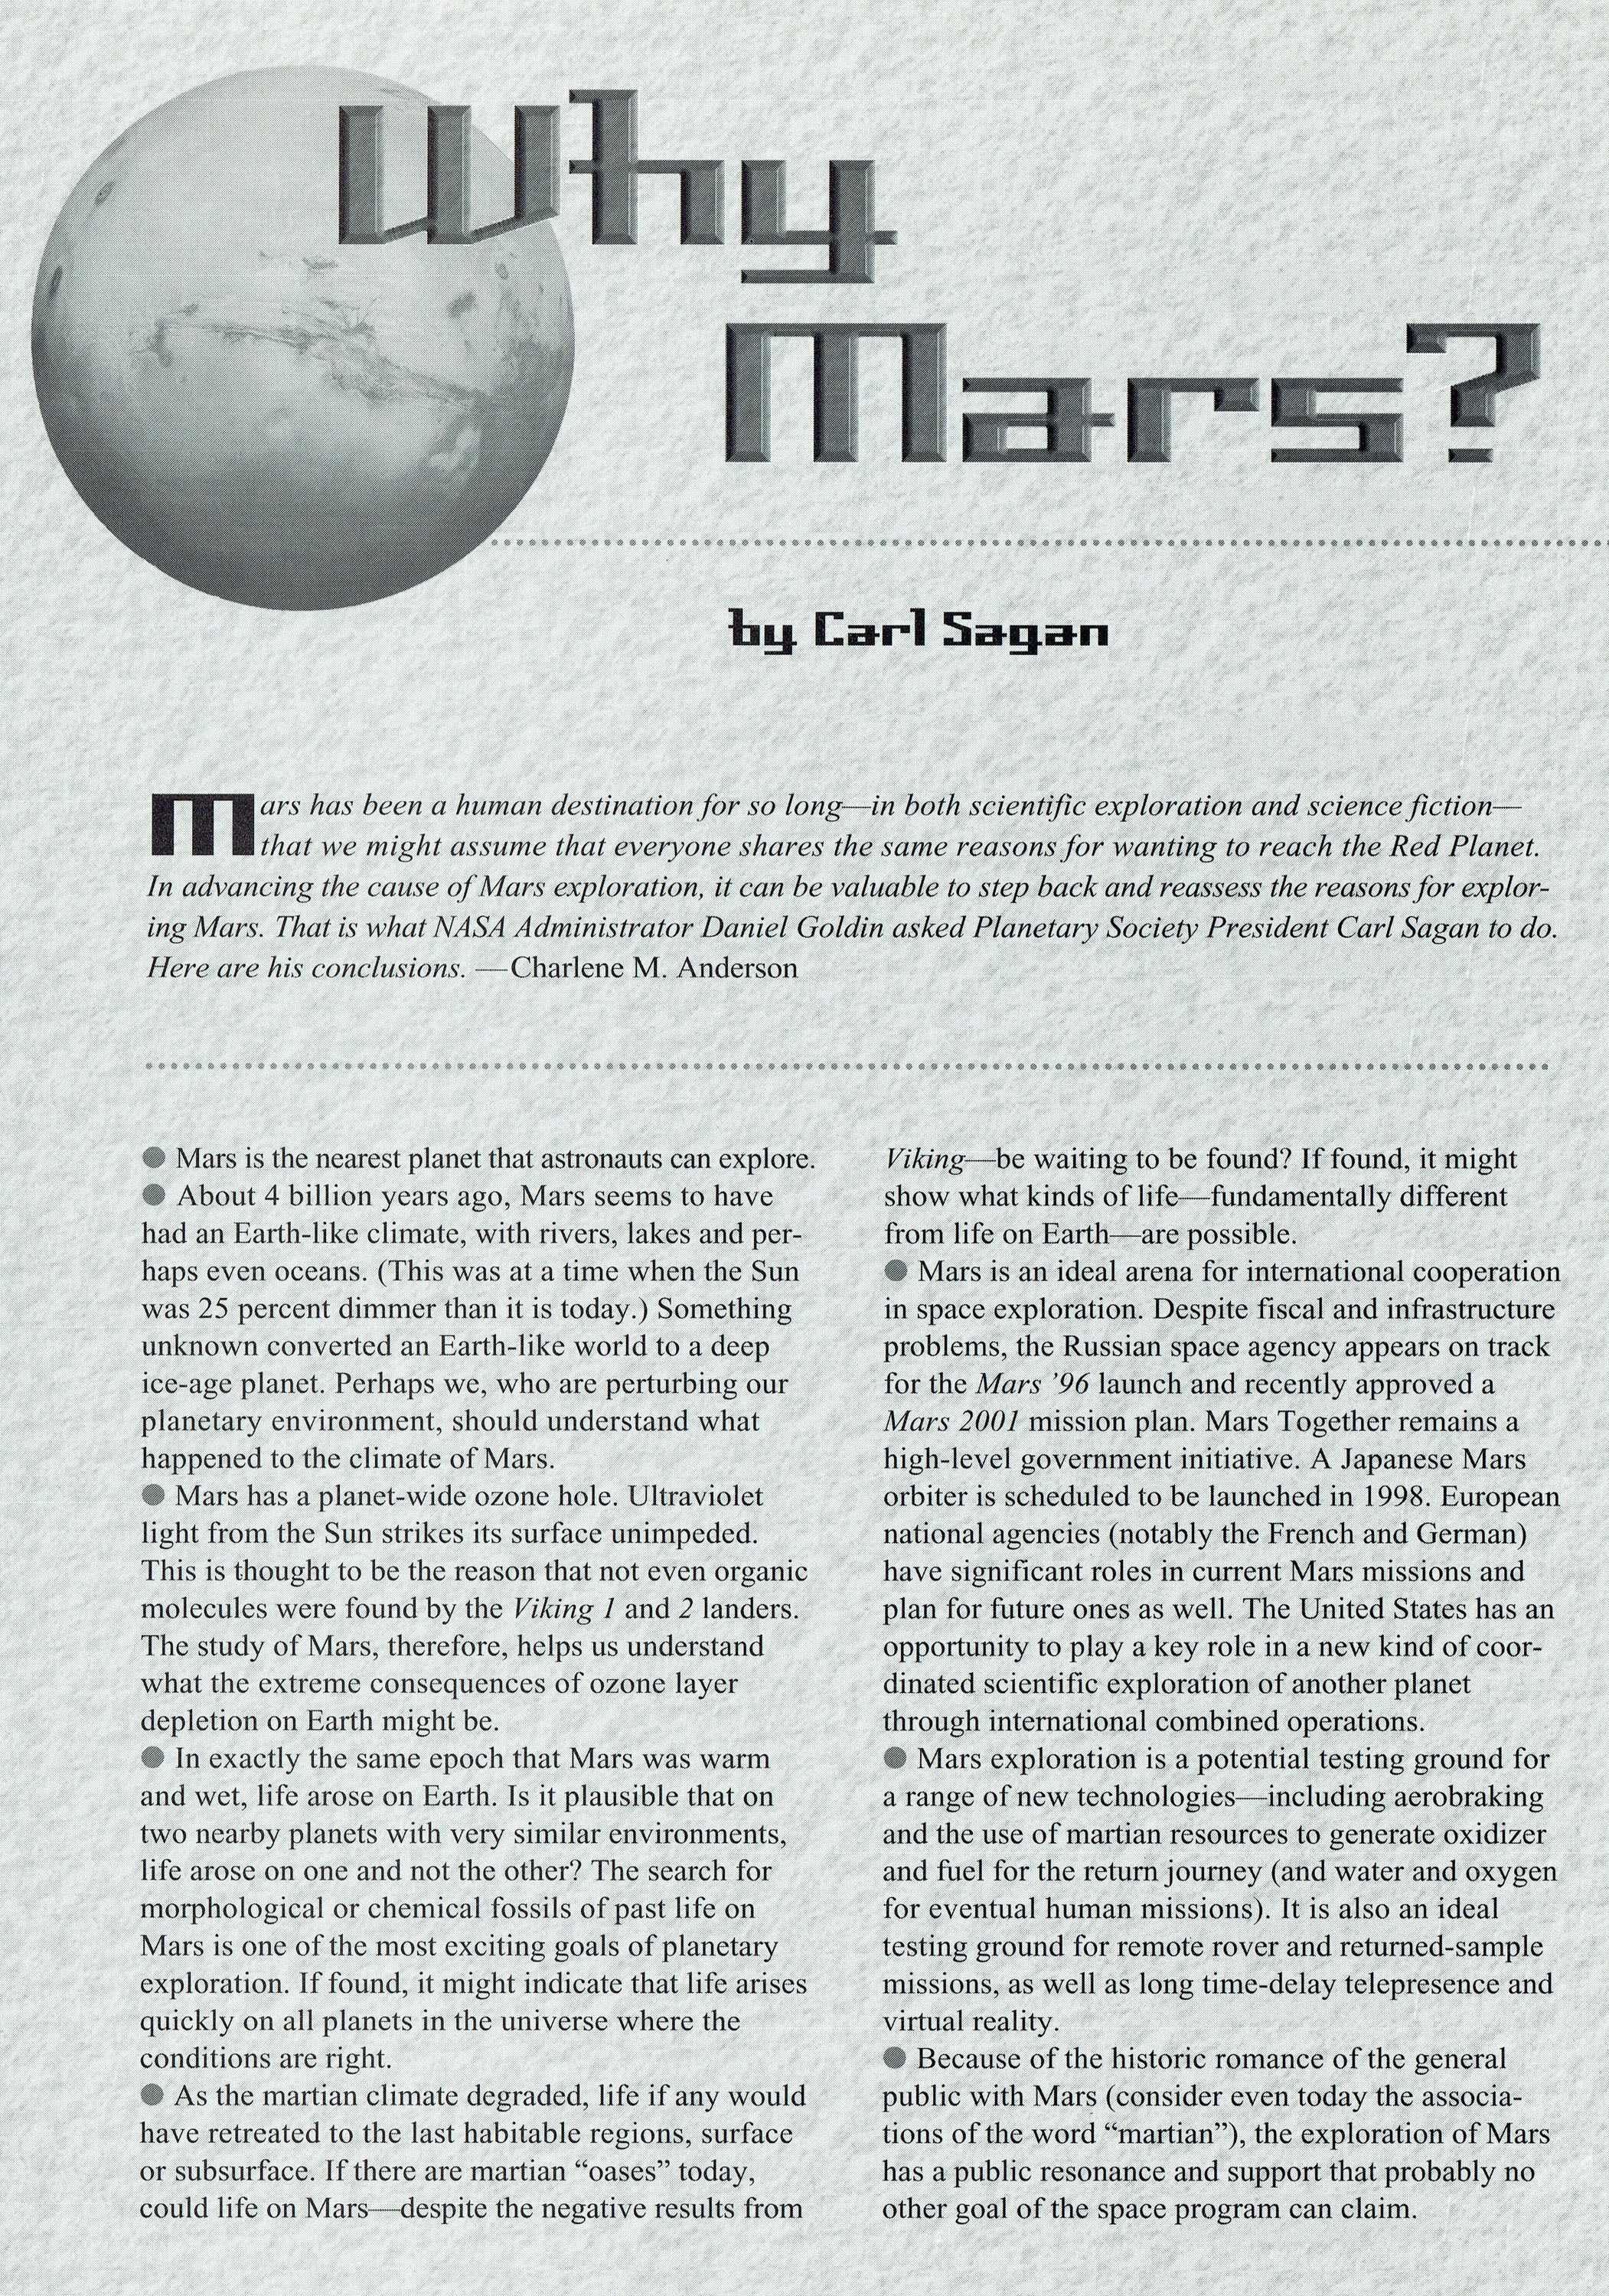 research questions about mars